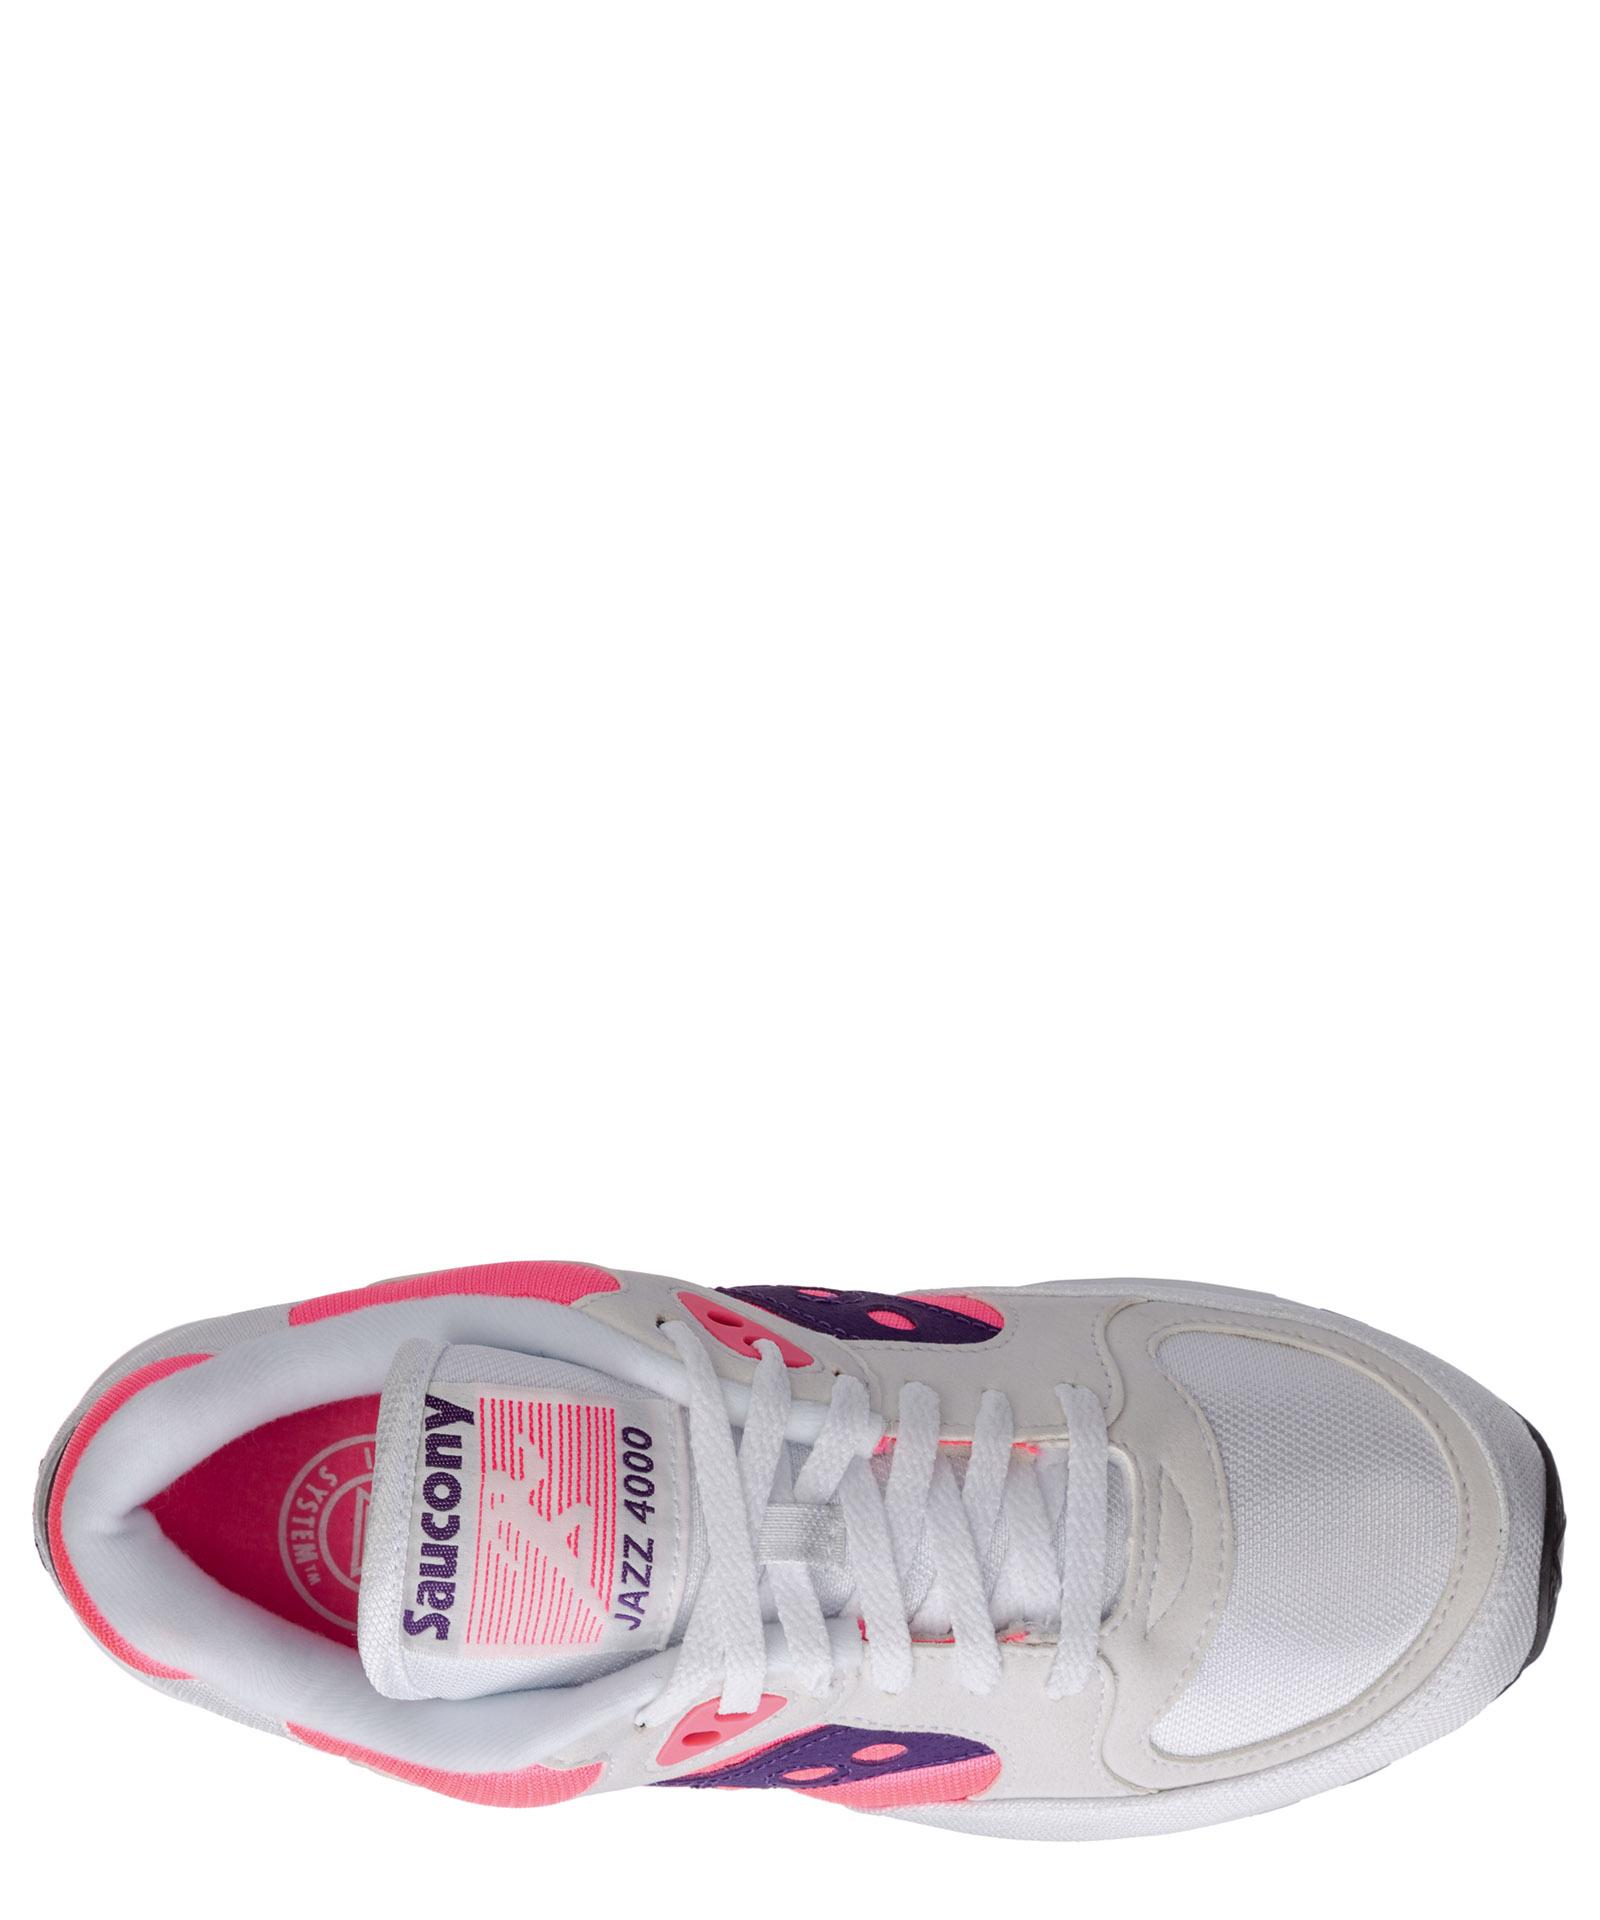 Saucony Jazz 4000 Sneakers in White (Pink) - Save 28% | Lyst